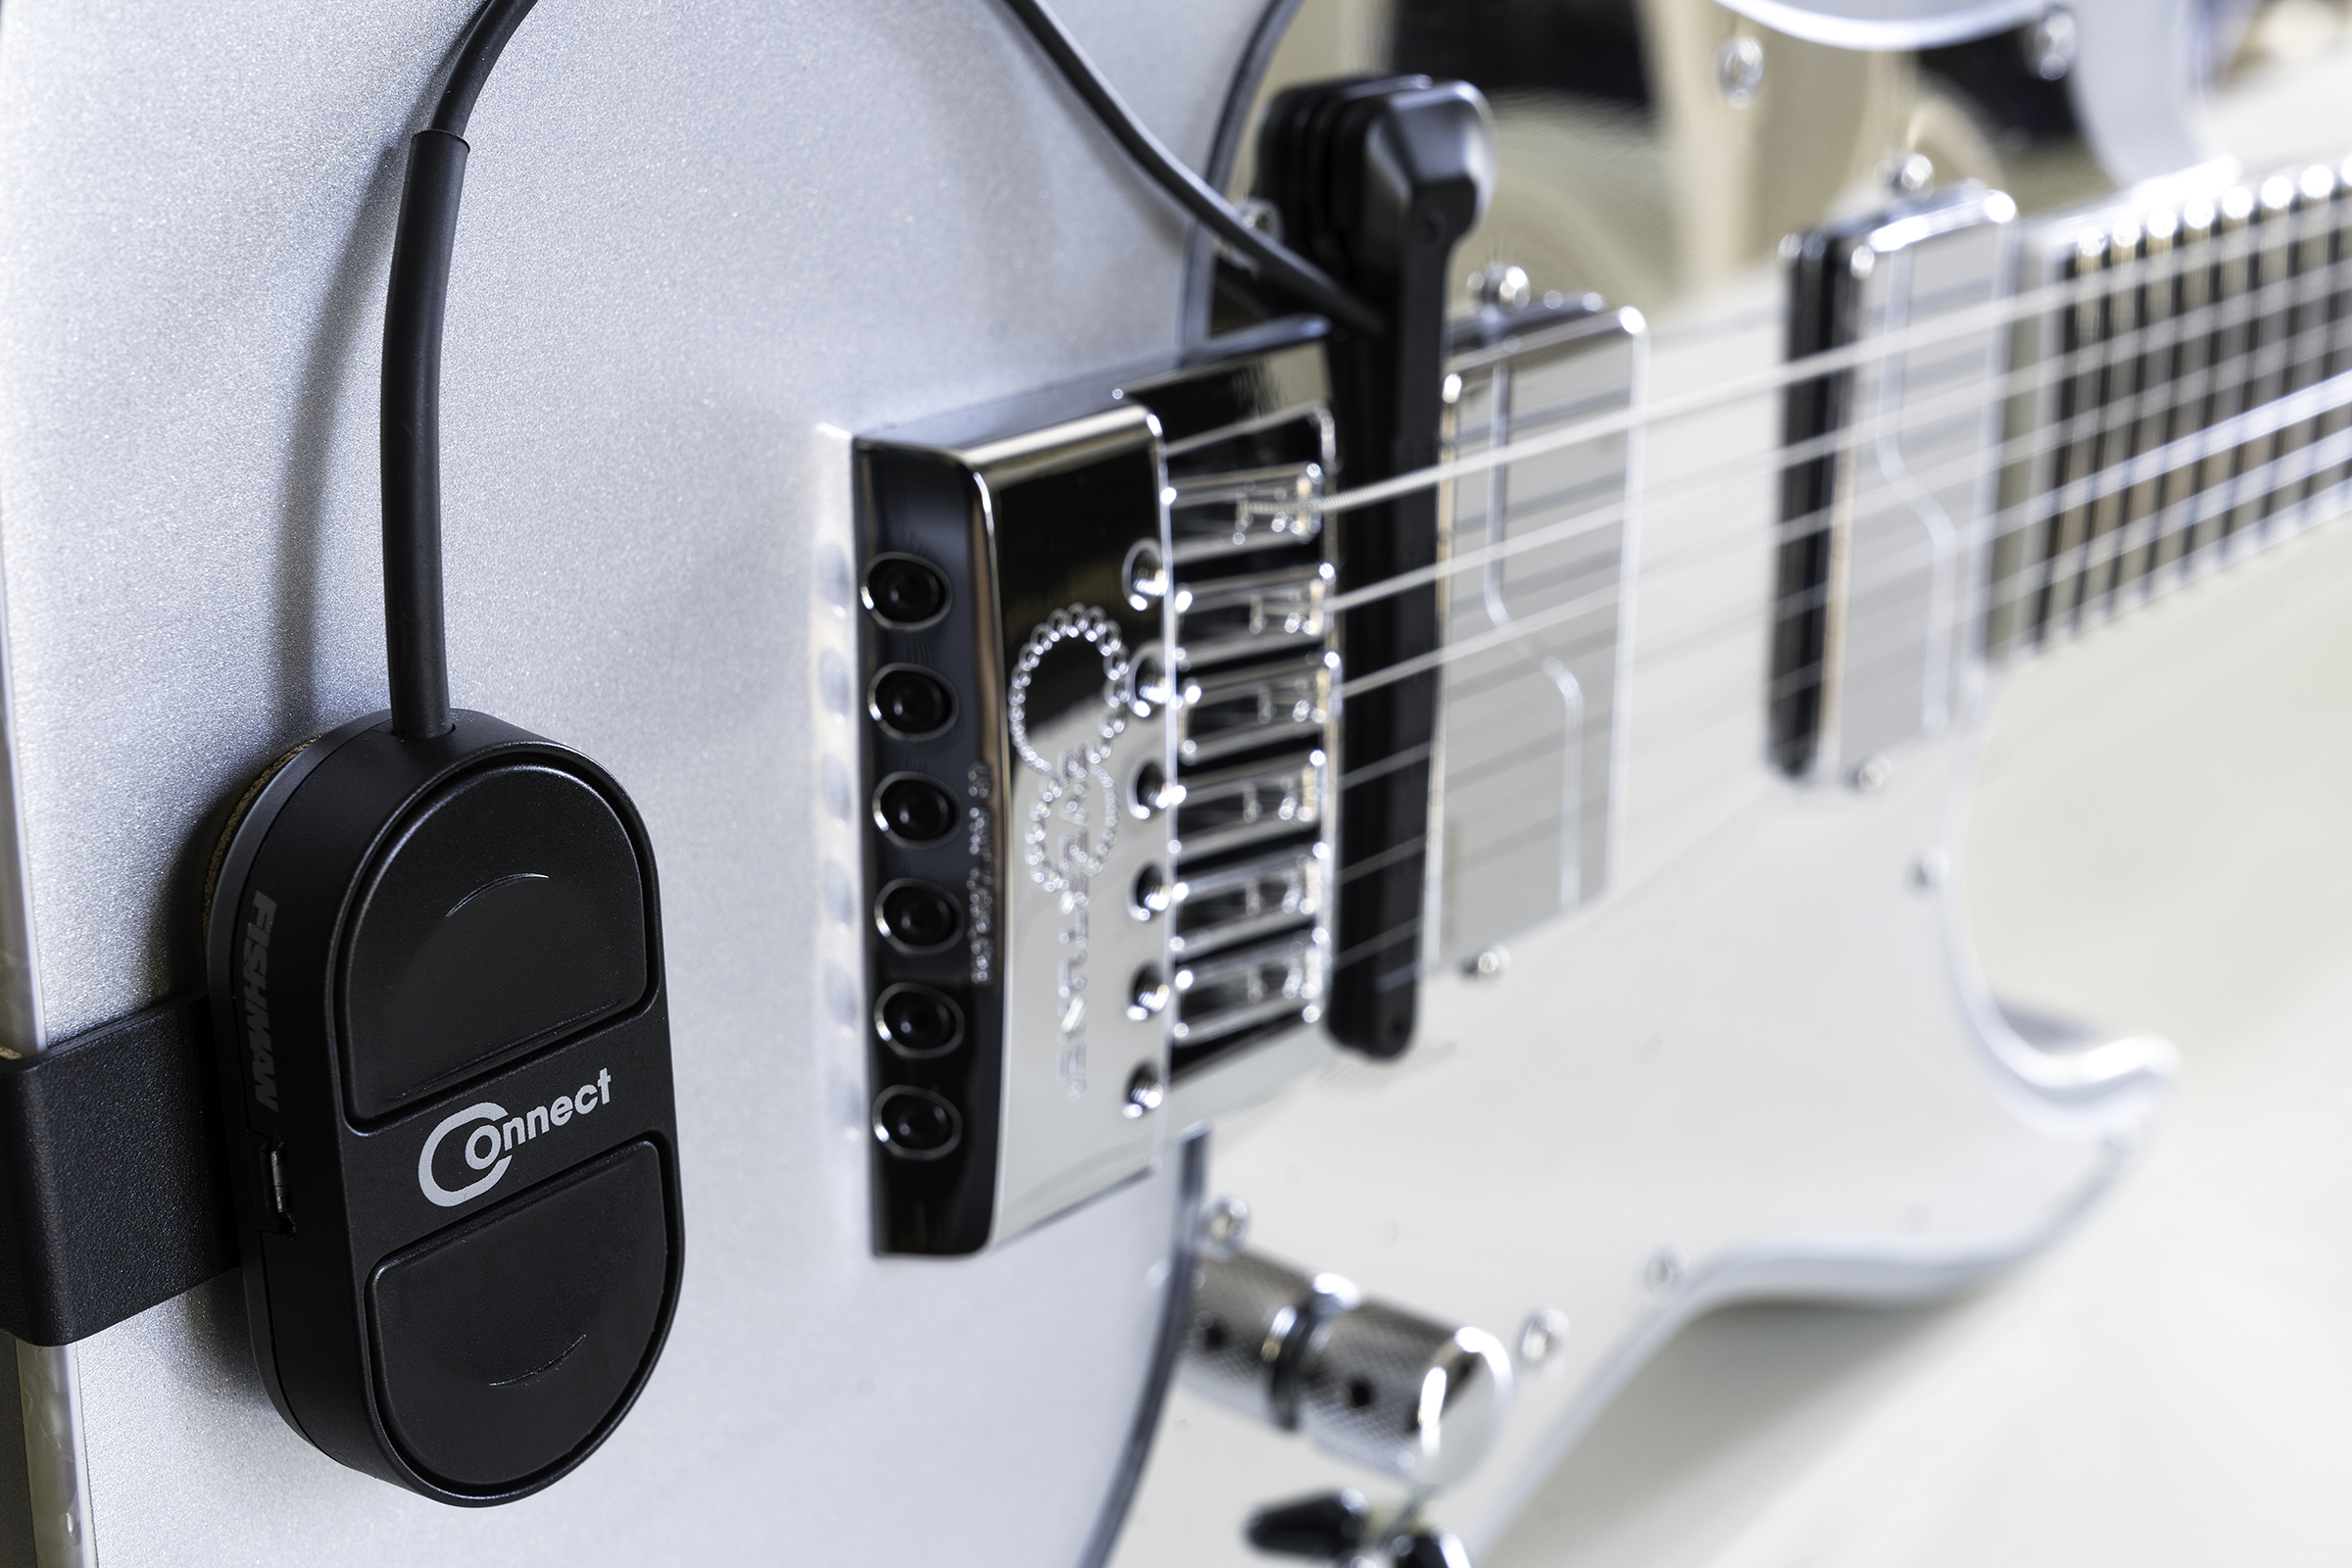 Fishman Updates Its TriplePlay MIDI Guitar Products And Adds New, Expanded Software Bundle